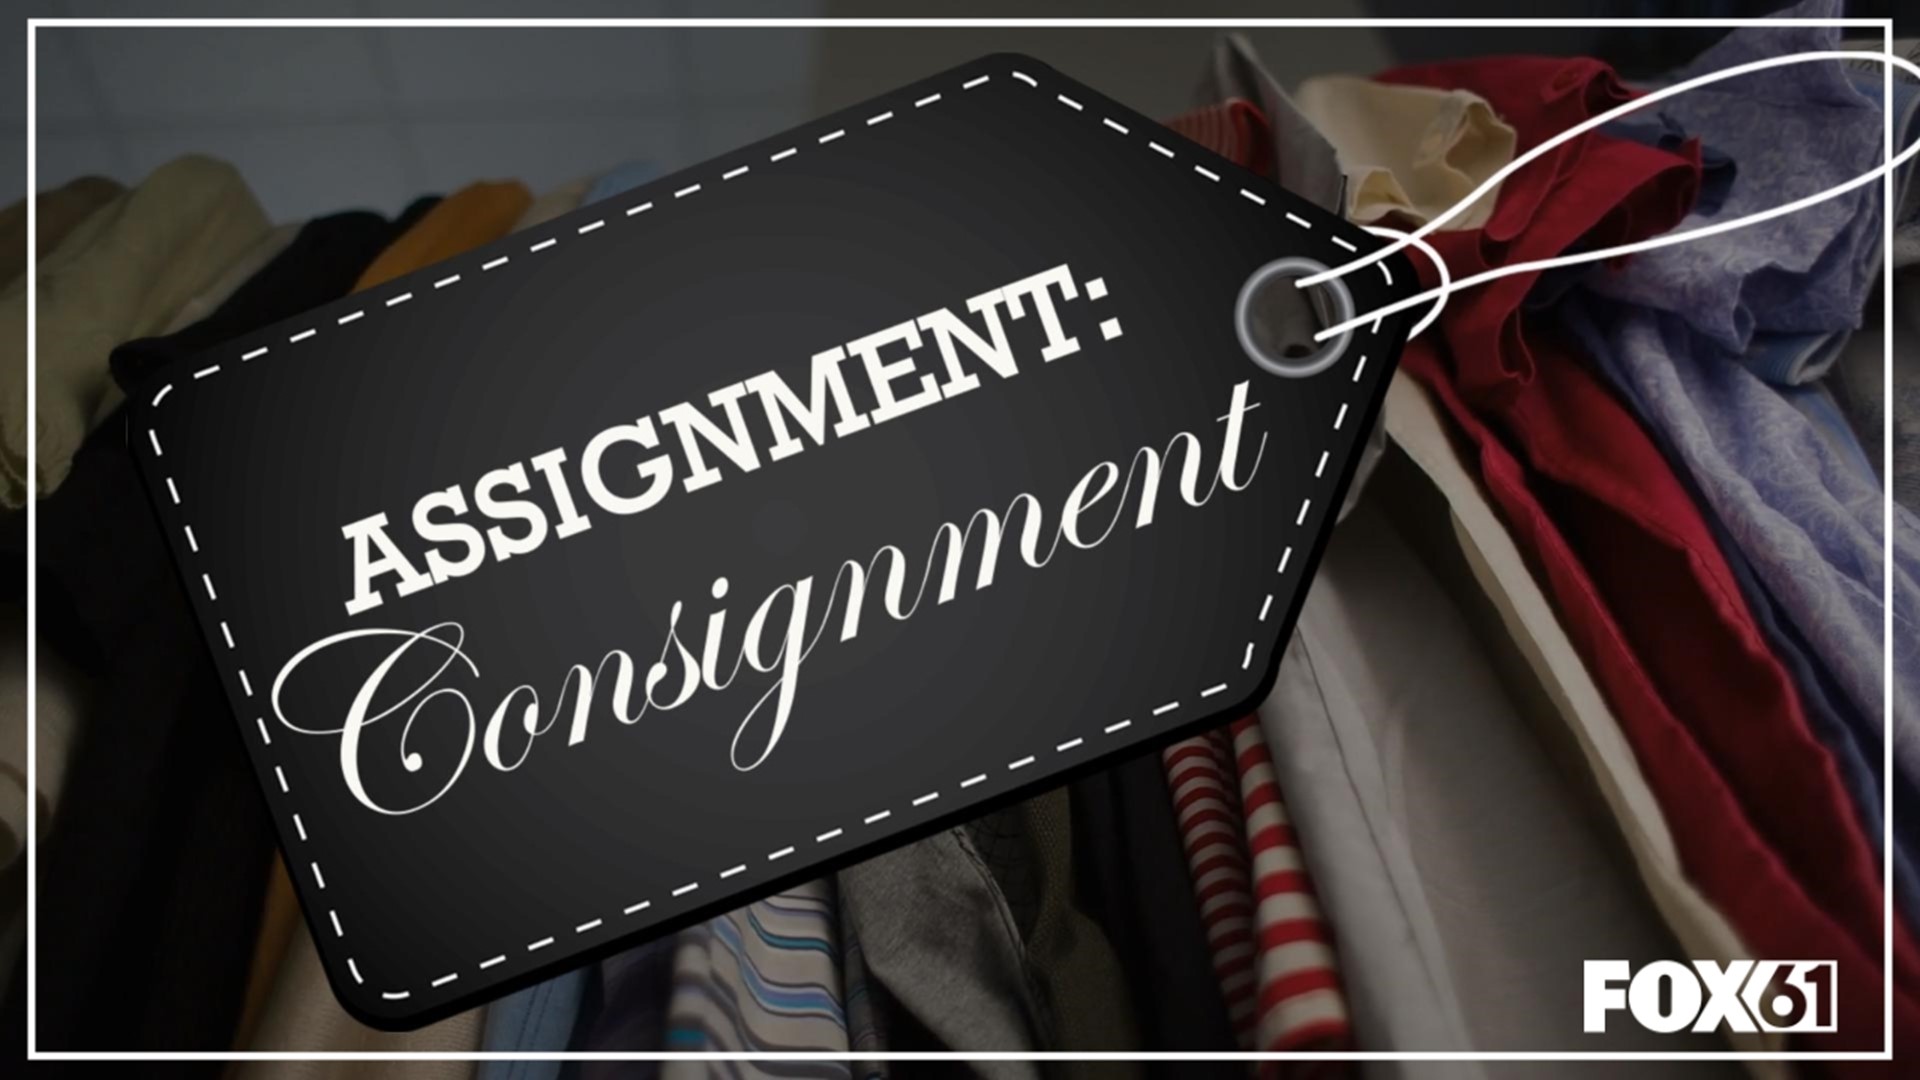 Consignment shops not only help you fresh up your look without breaking the bank, but you can also see some money coming back your way.